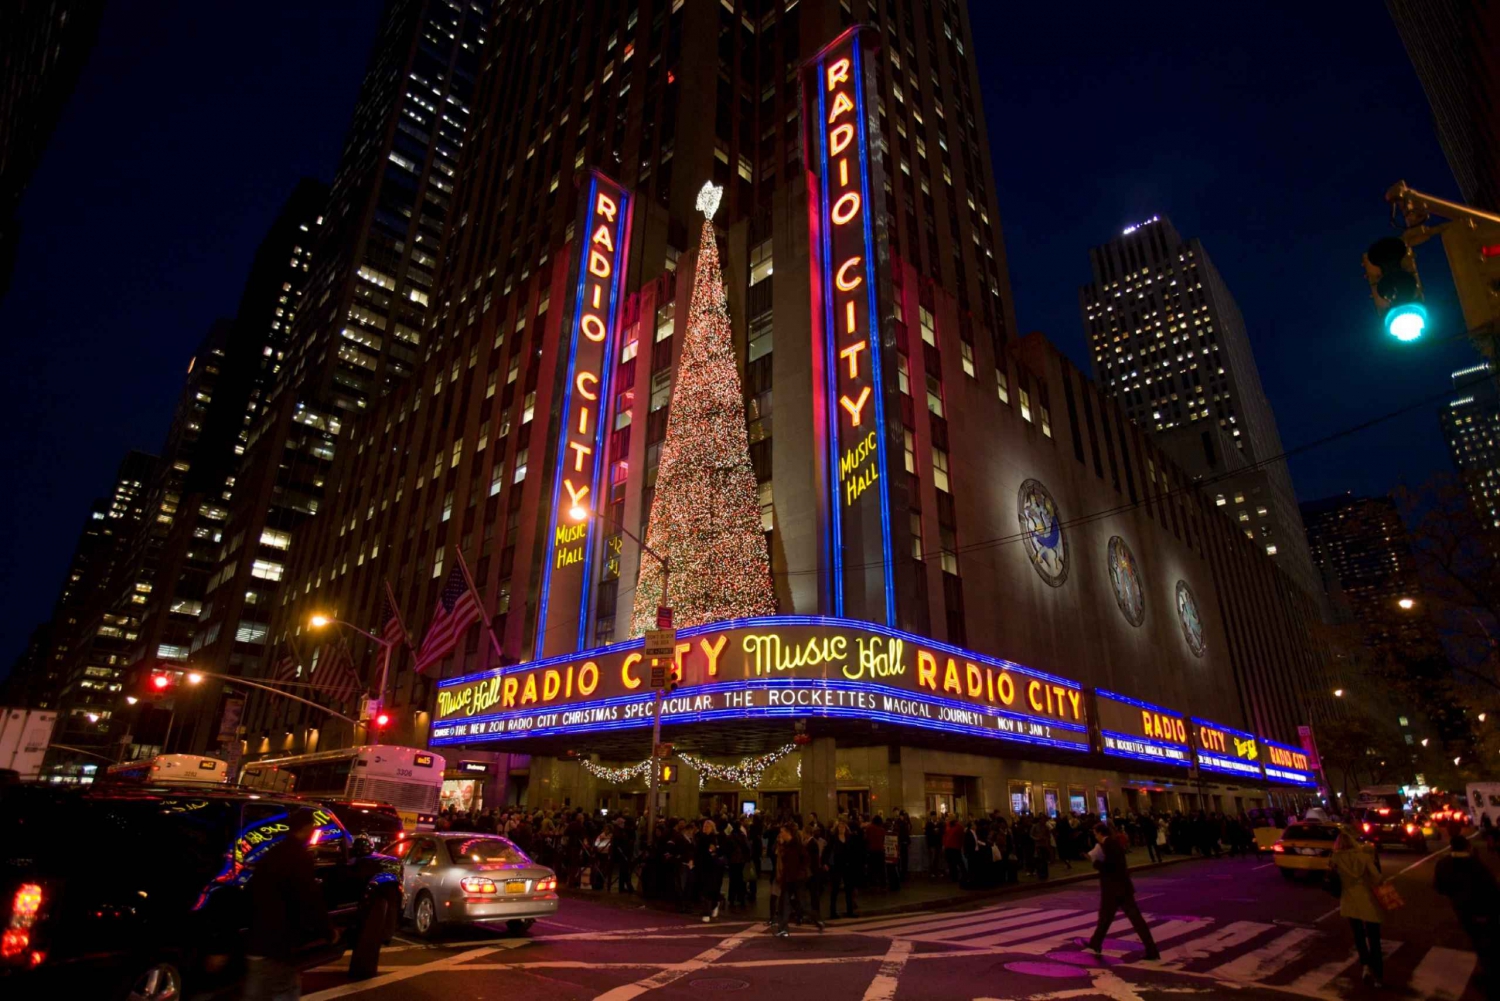 Attending-the-Radio-City-Christmas-Spectacular